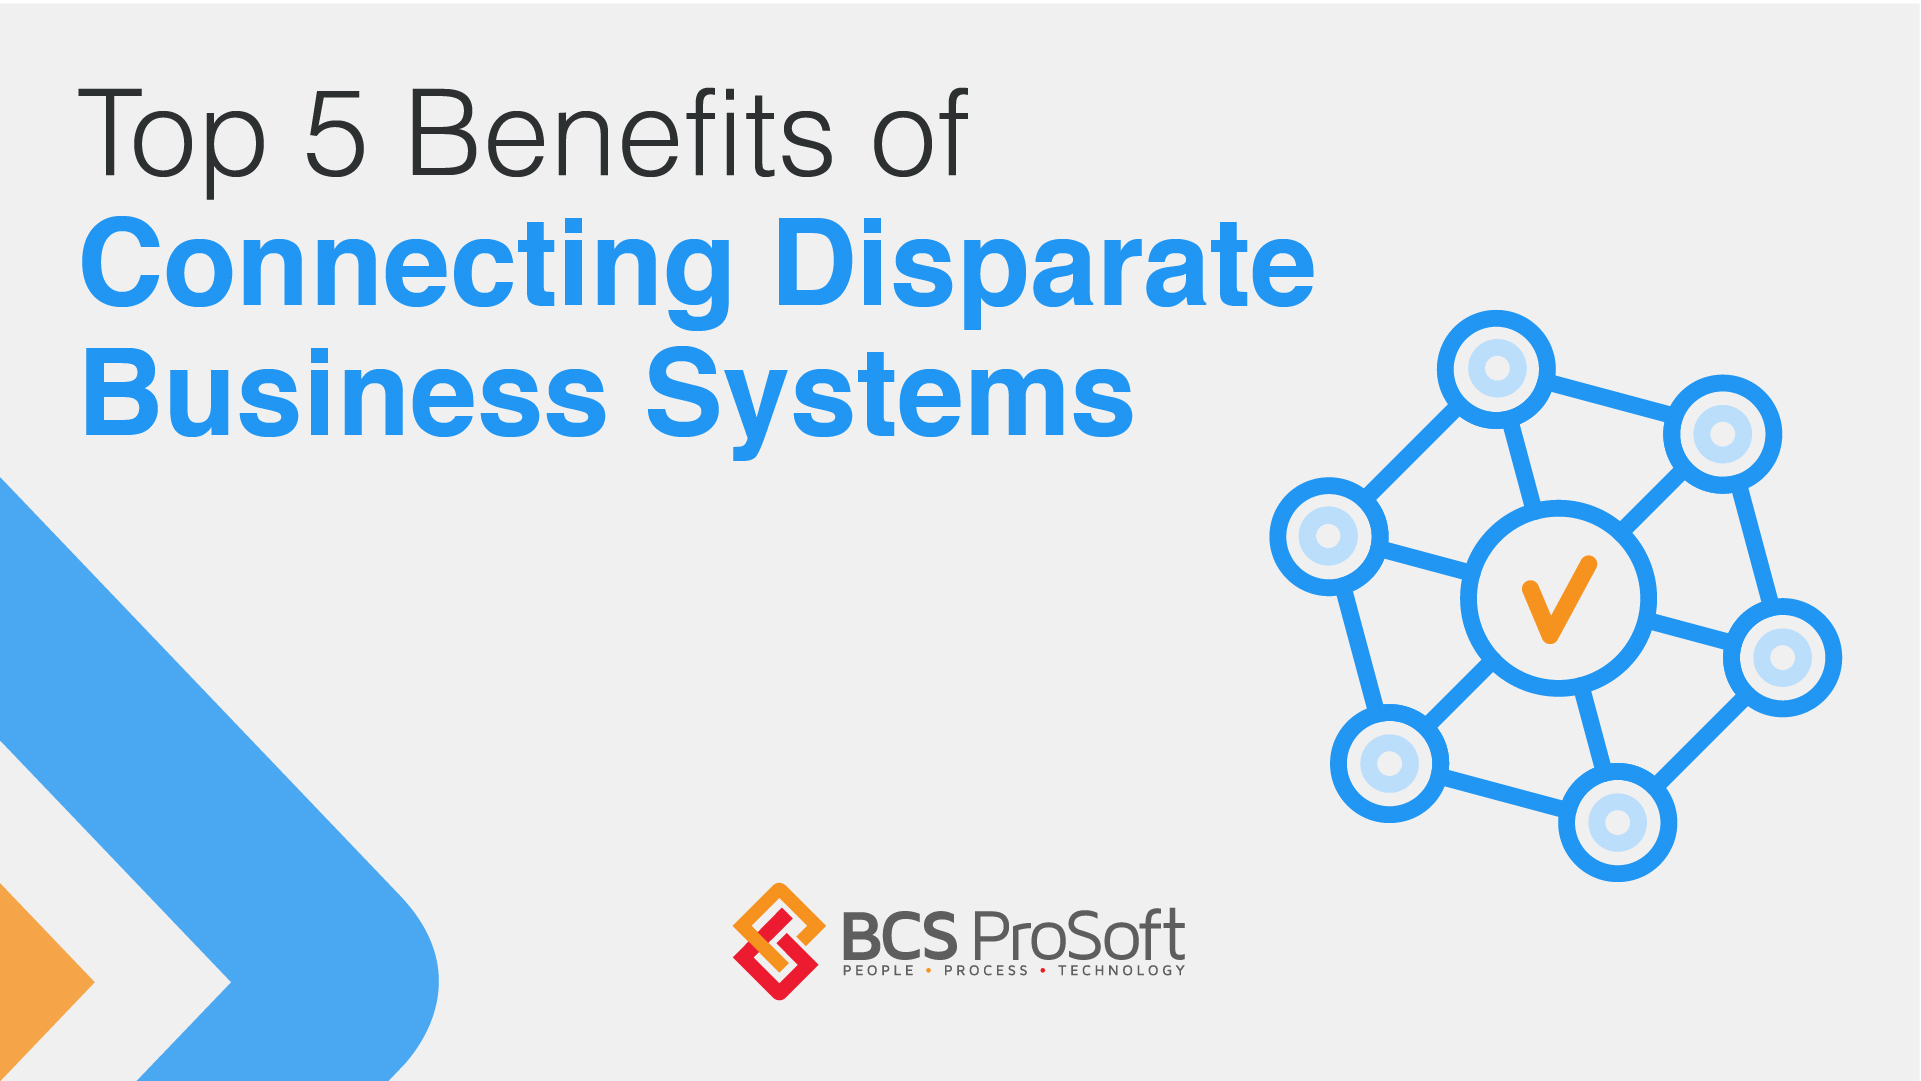 Blog-Banner-top-5-benefits-of-connecting-disparate-business-systems-bcs-prosoft-netsuite-sage-intacct-deltek-erp-software-03-1